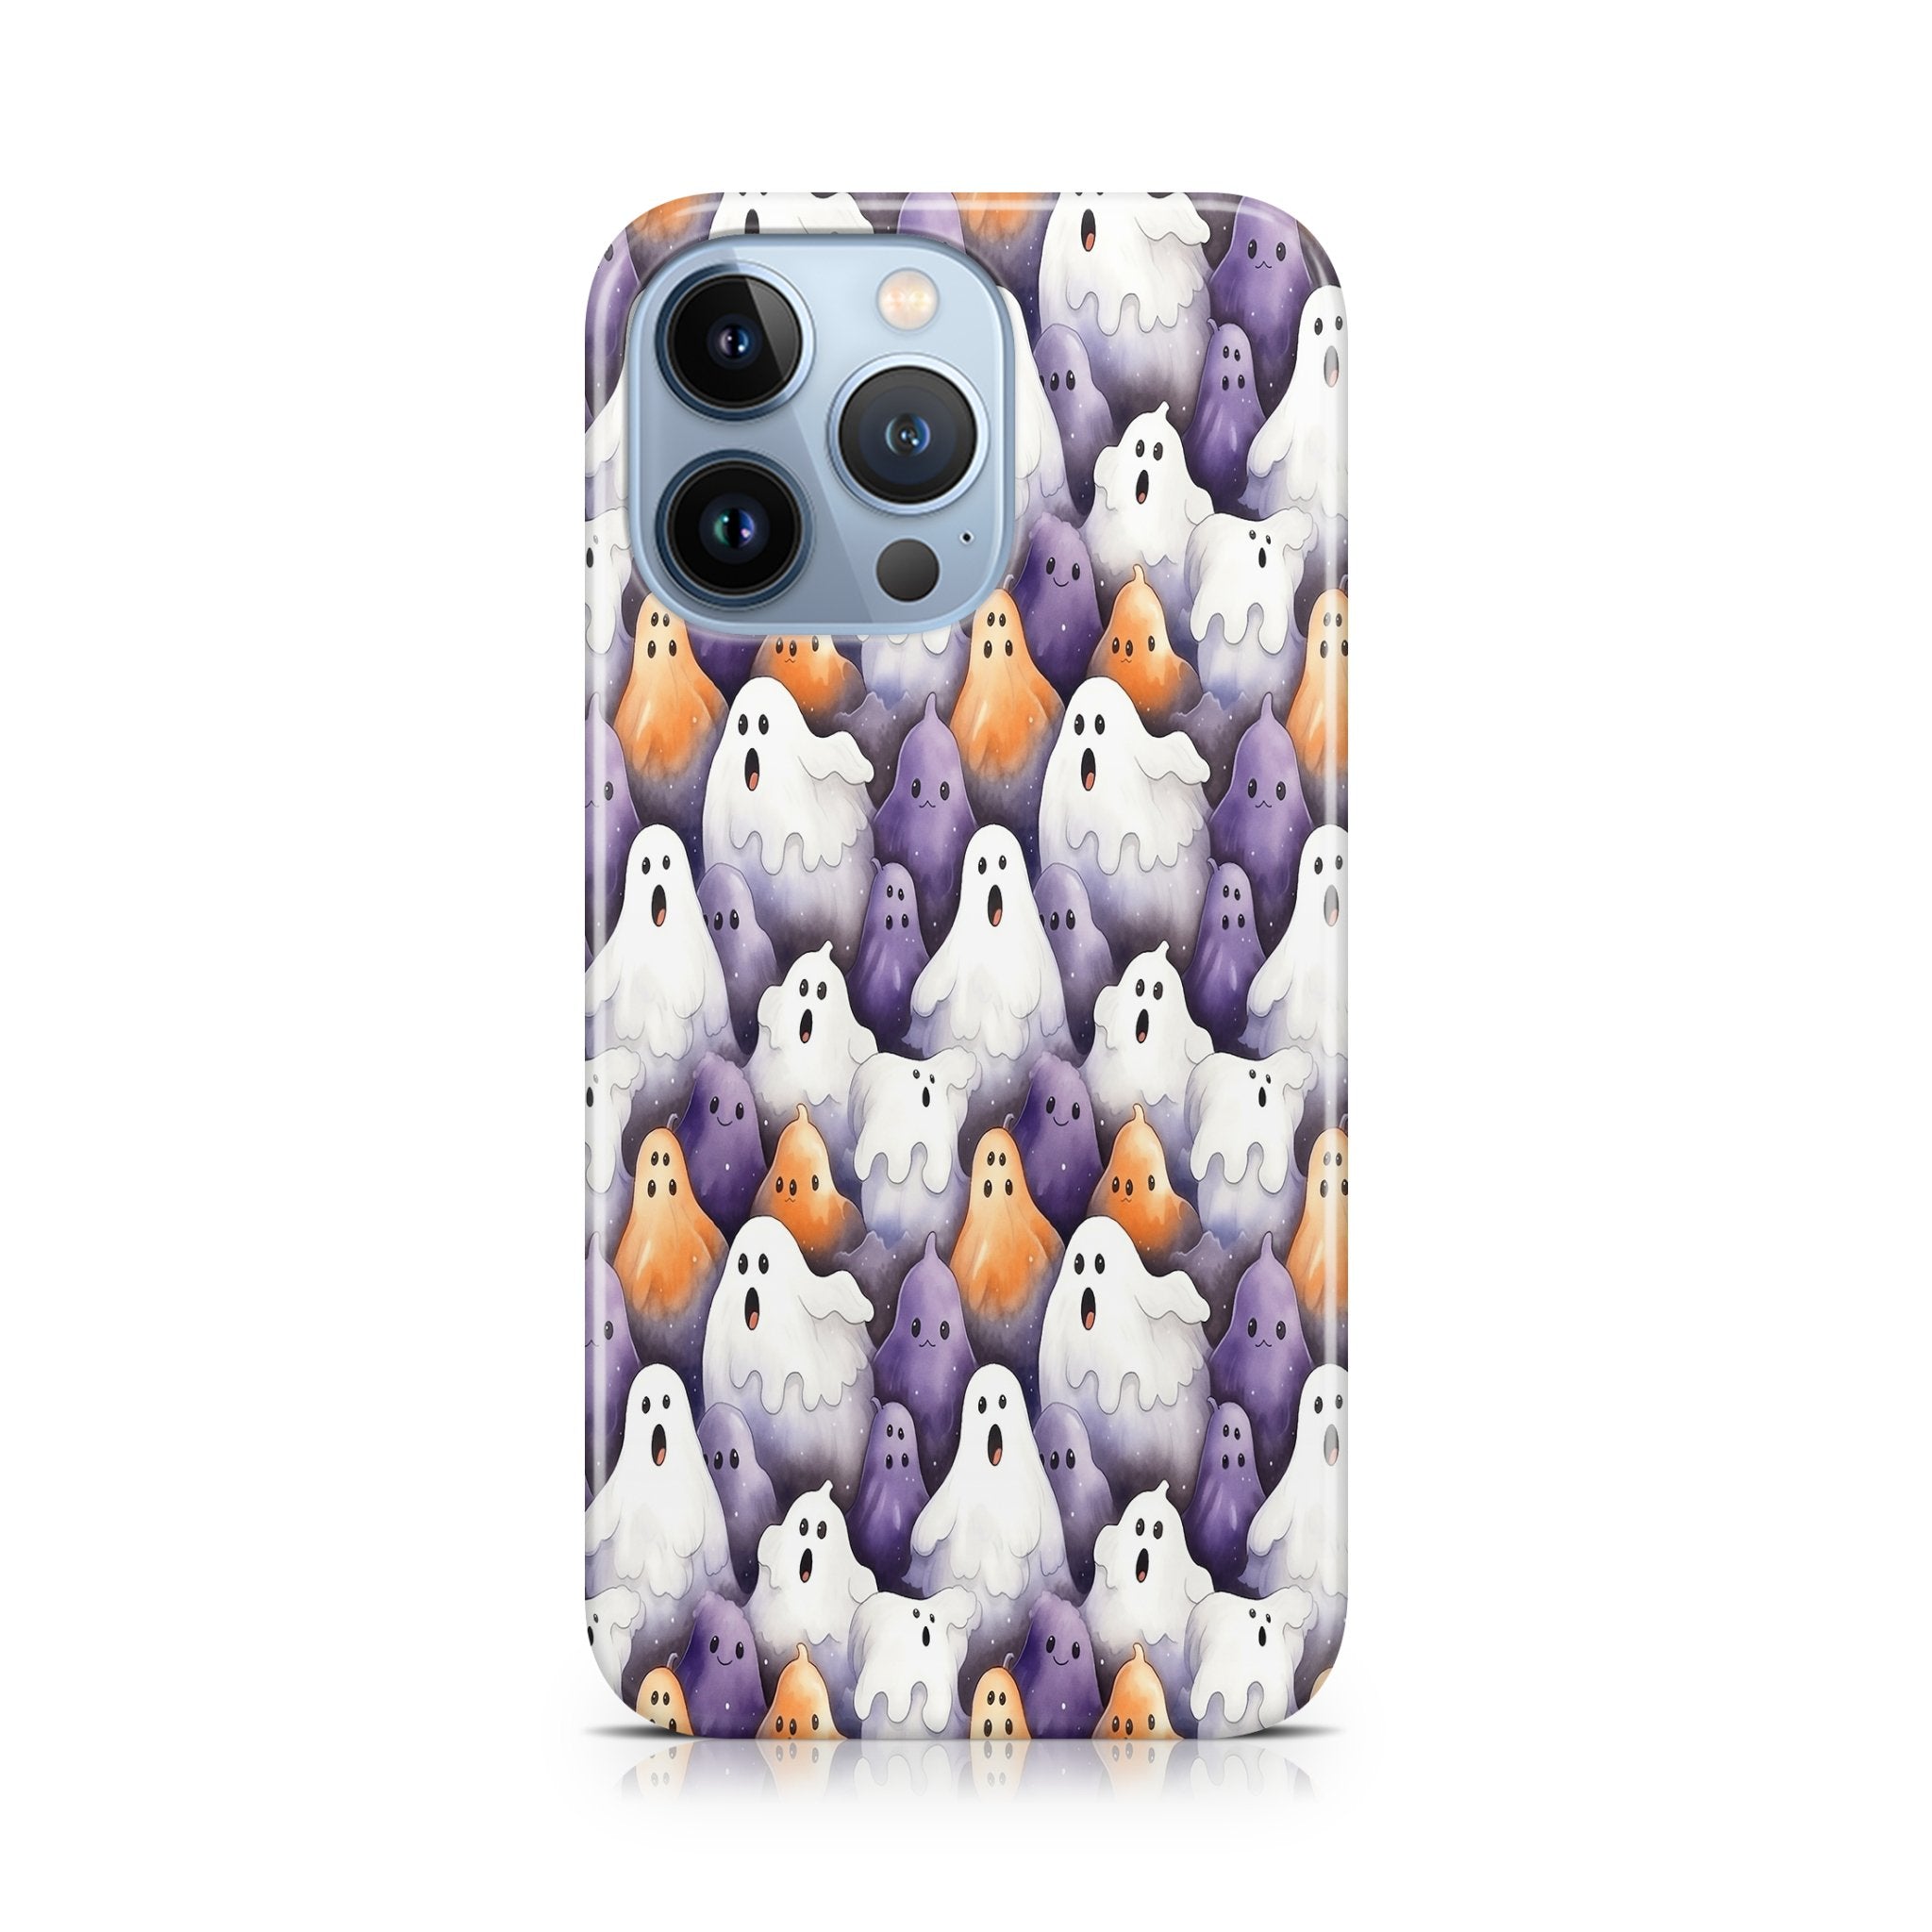 Spooky Ghosts - iPhone phone case designs by CaseSwagger